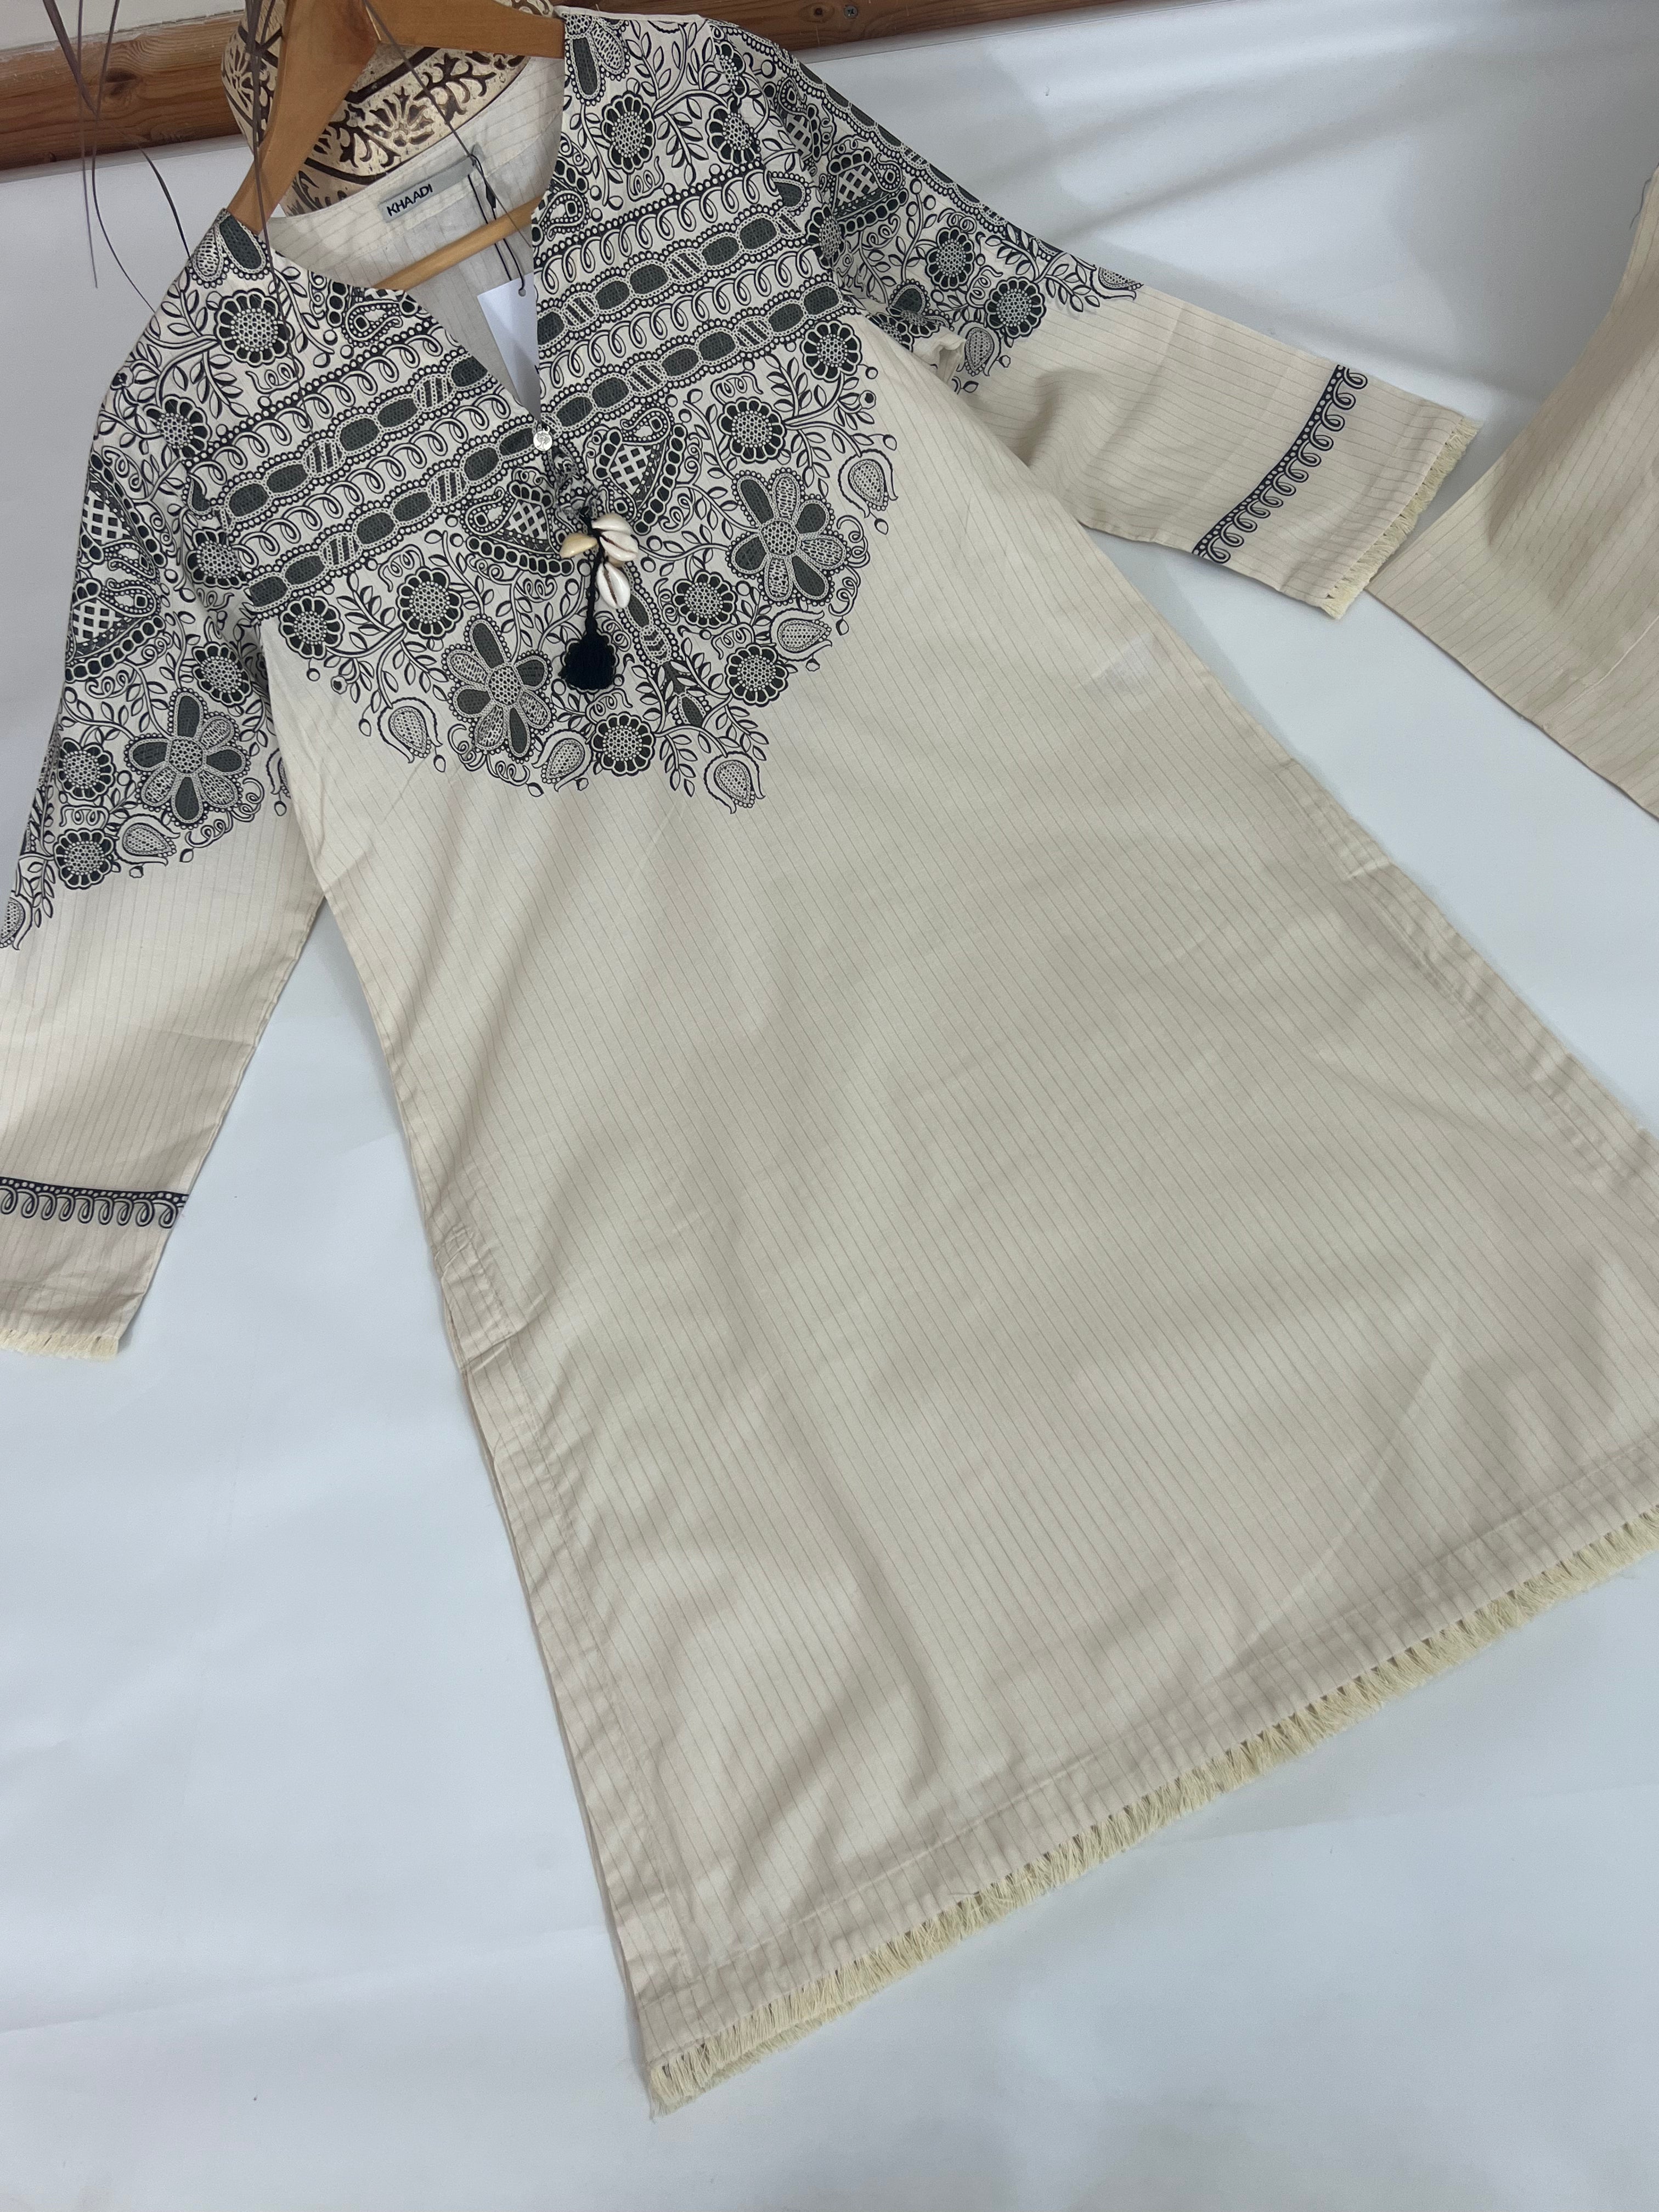 Khaadi Off-White 2 Piece Lawn Outfit